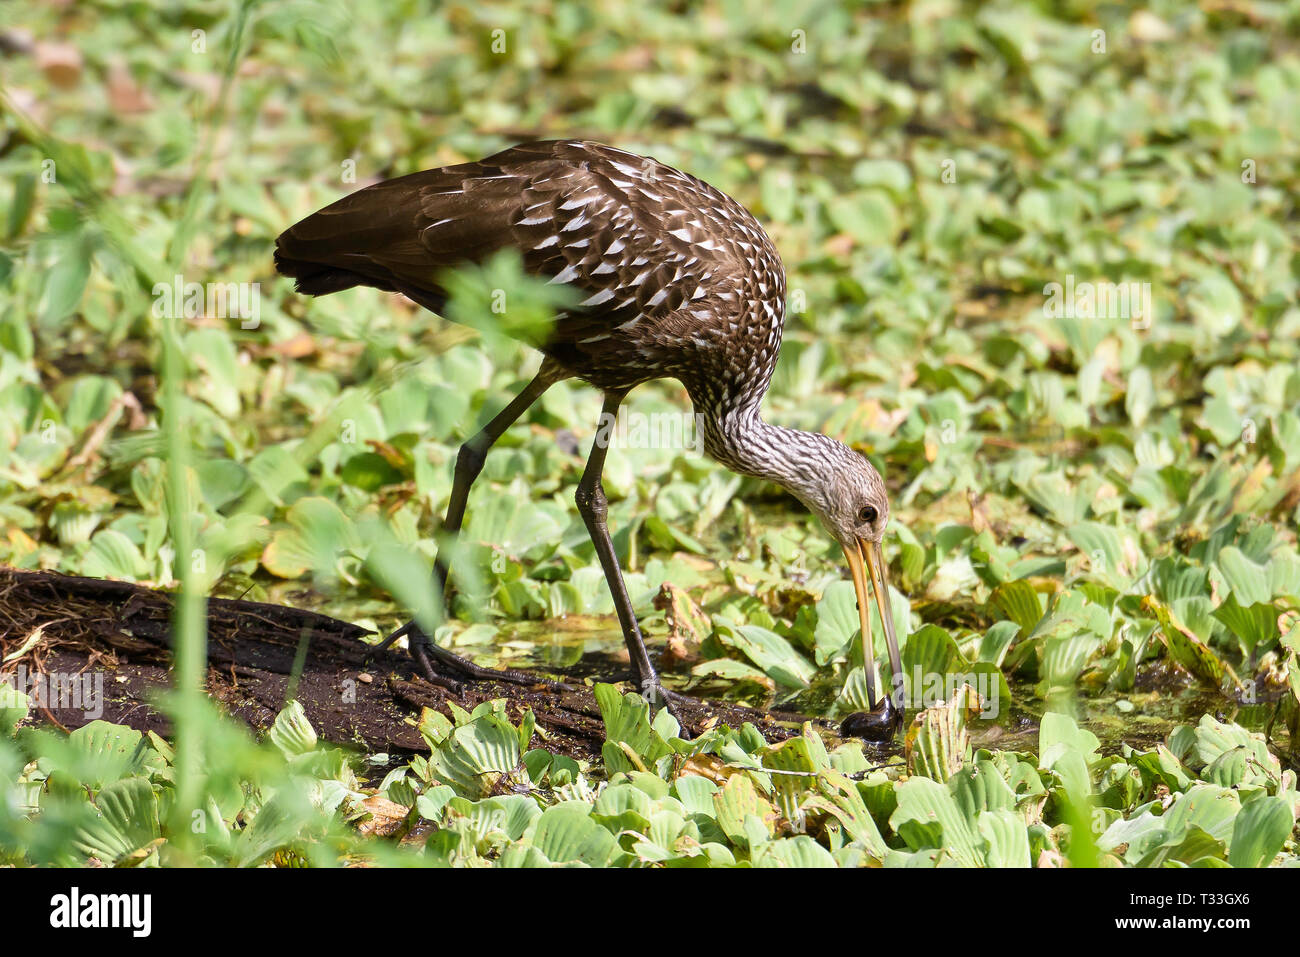 Limpkin (Aramus guarauna) eating an apple snail caught in water cabbage covered swamp water, Corkscrew Swamp Sanctuary, Florida, USA Stock Photo